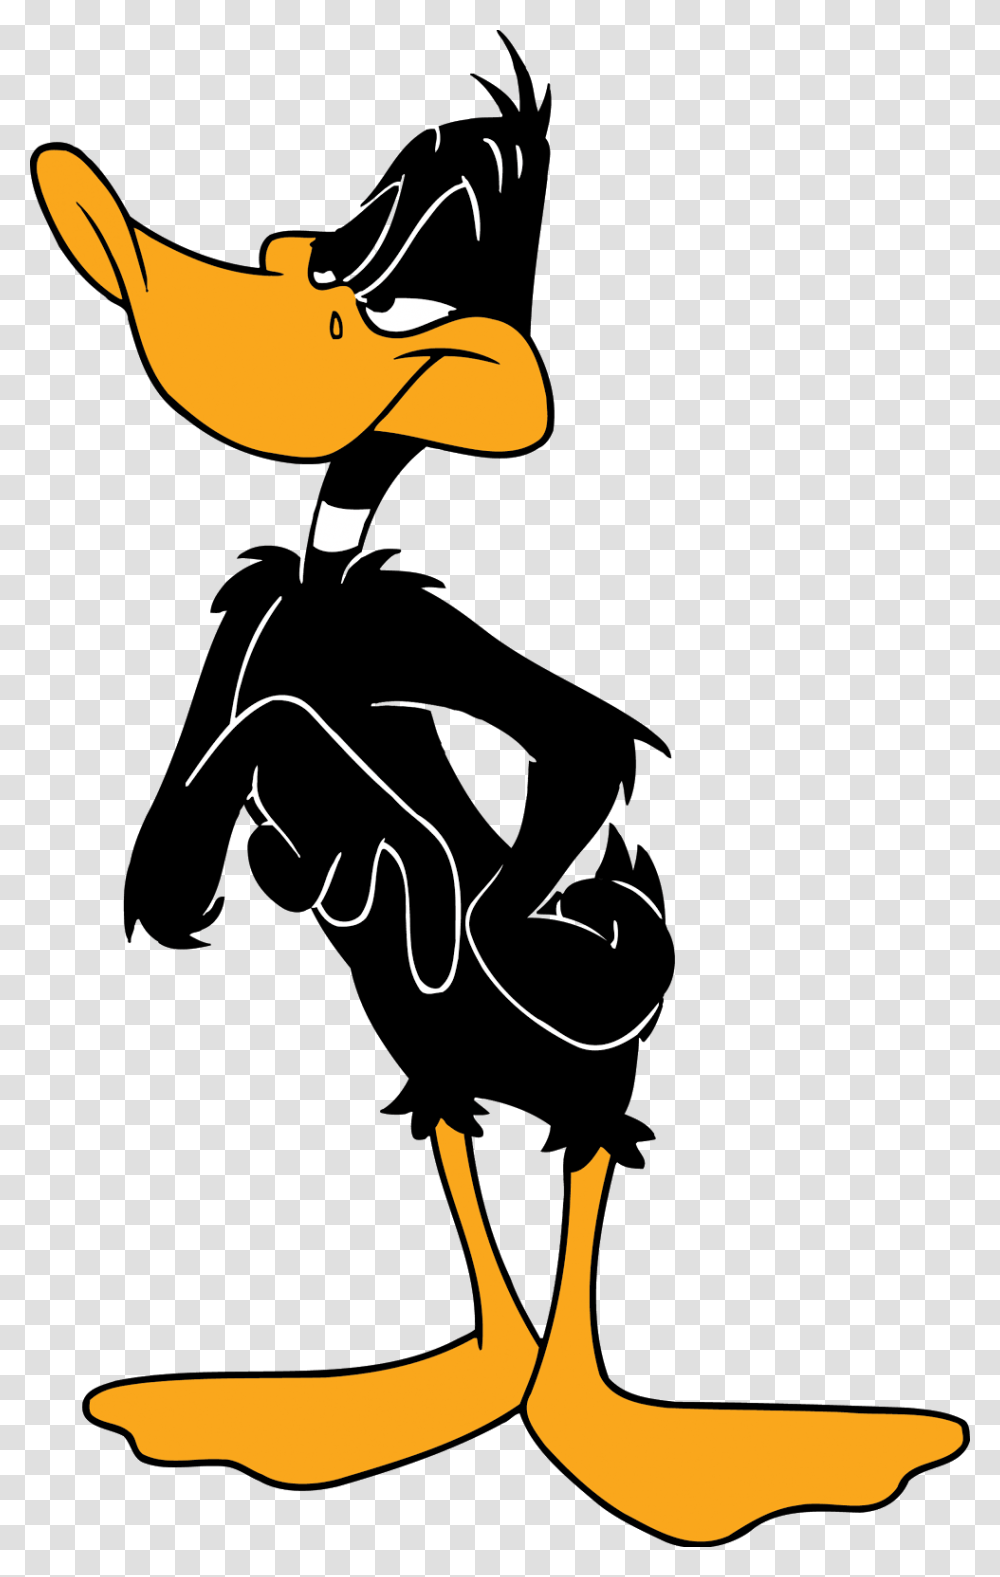 Daffy Duck Bugs Bunny Rabbit Rampage Porky Pig Donald Daffy Duck Looney Tunes, Silhouette, Helmet Transparent Png